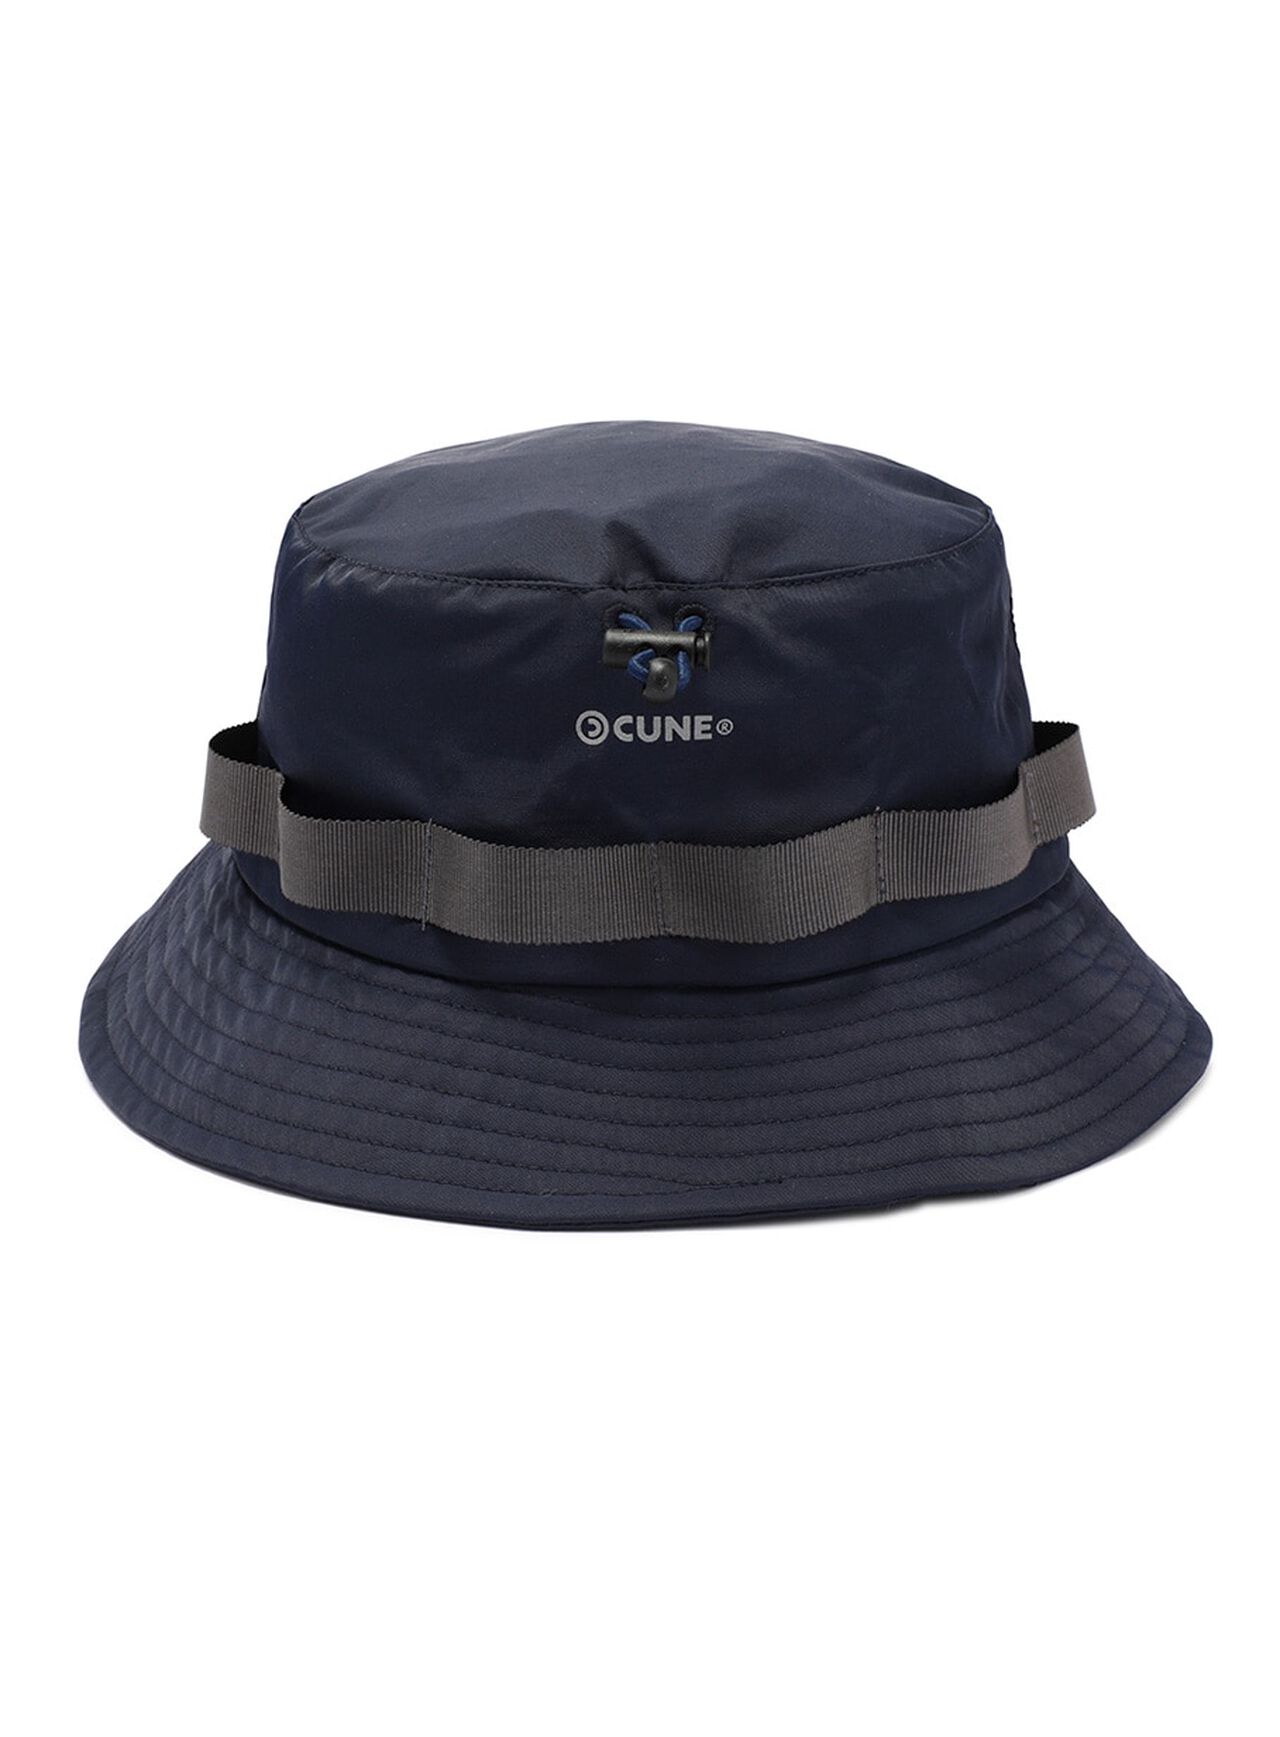 ODC Bucket Hat,ONE, large image number 1